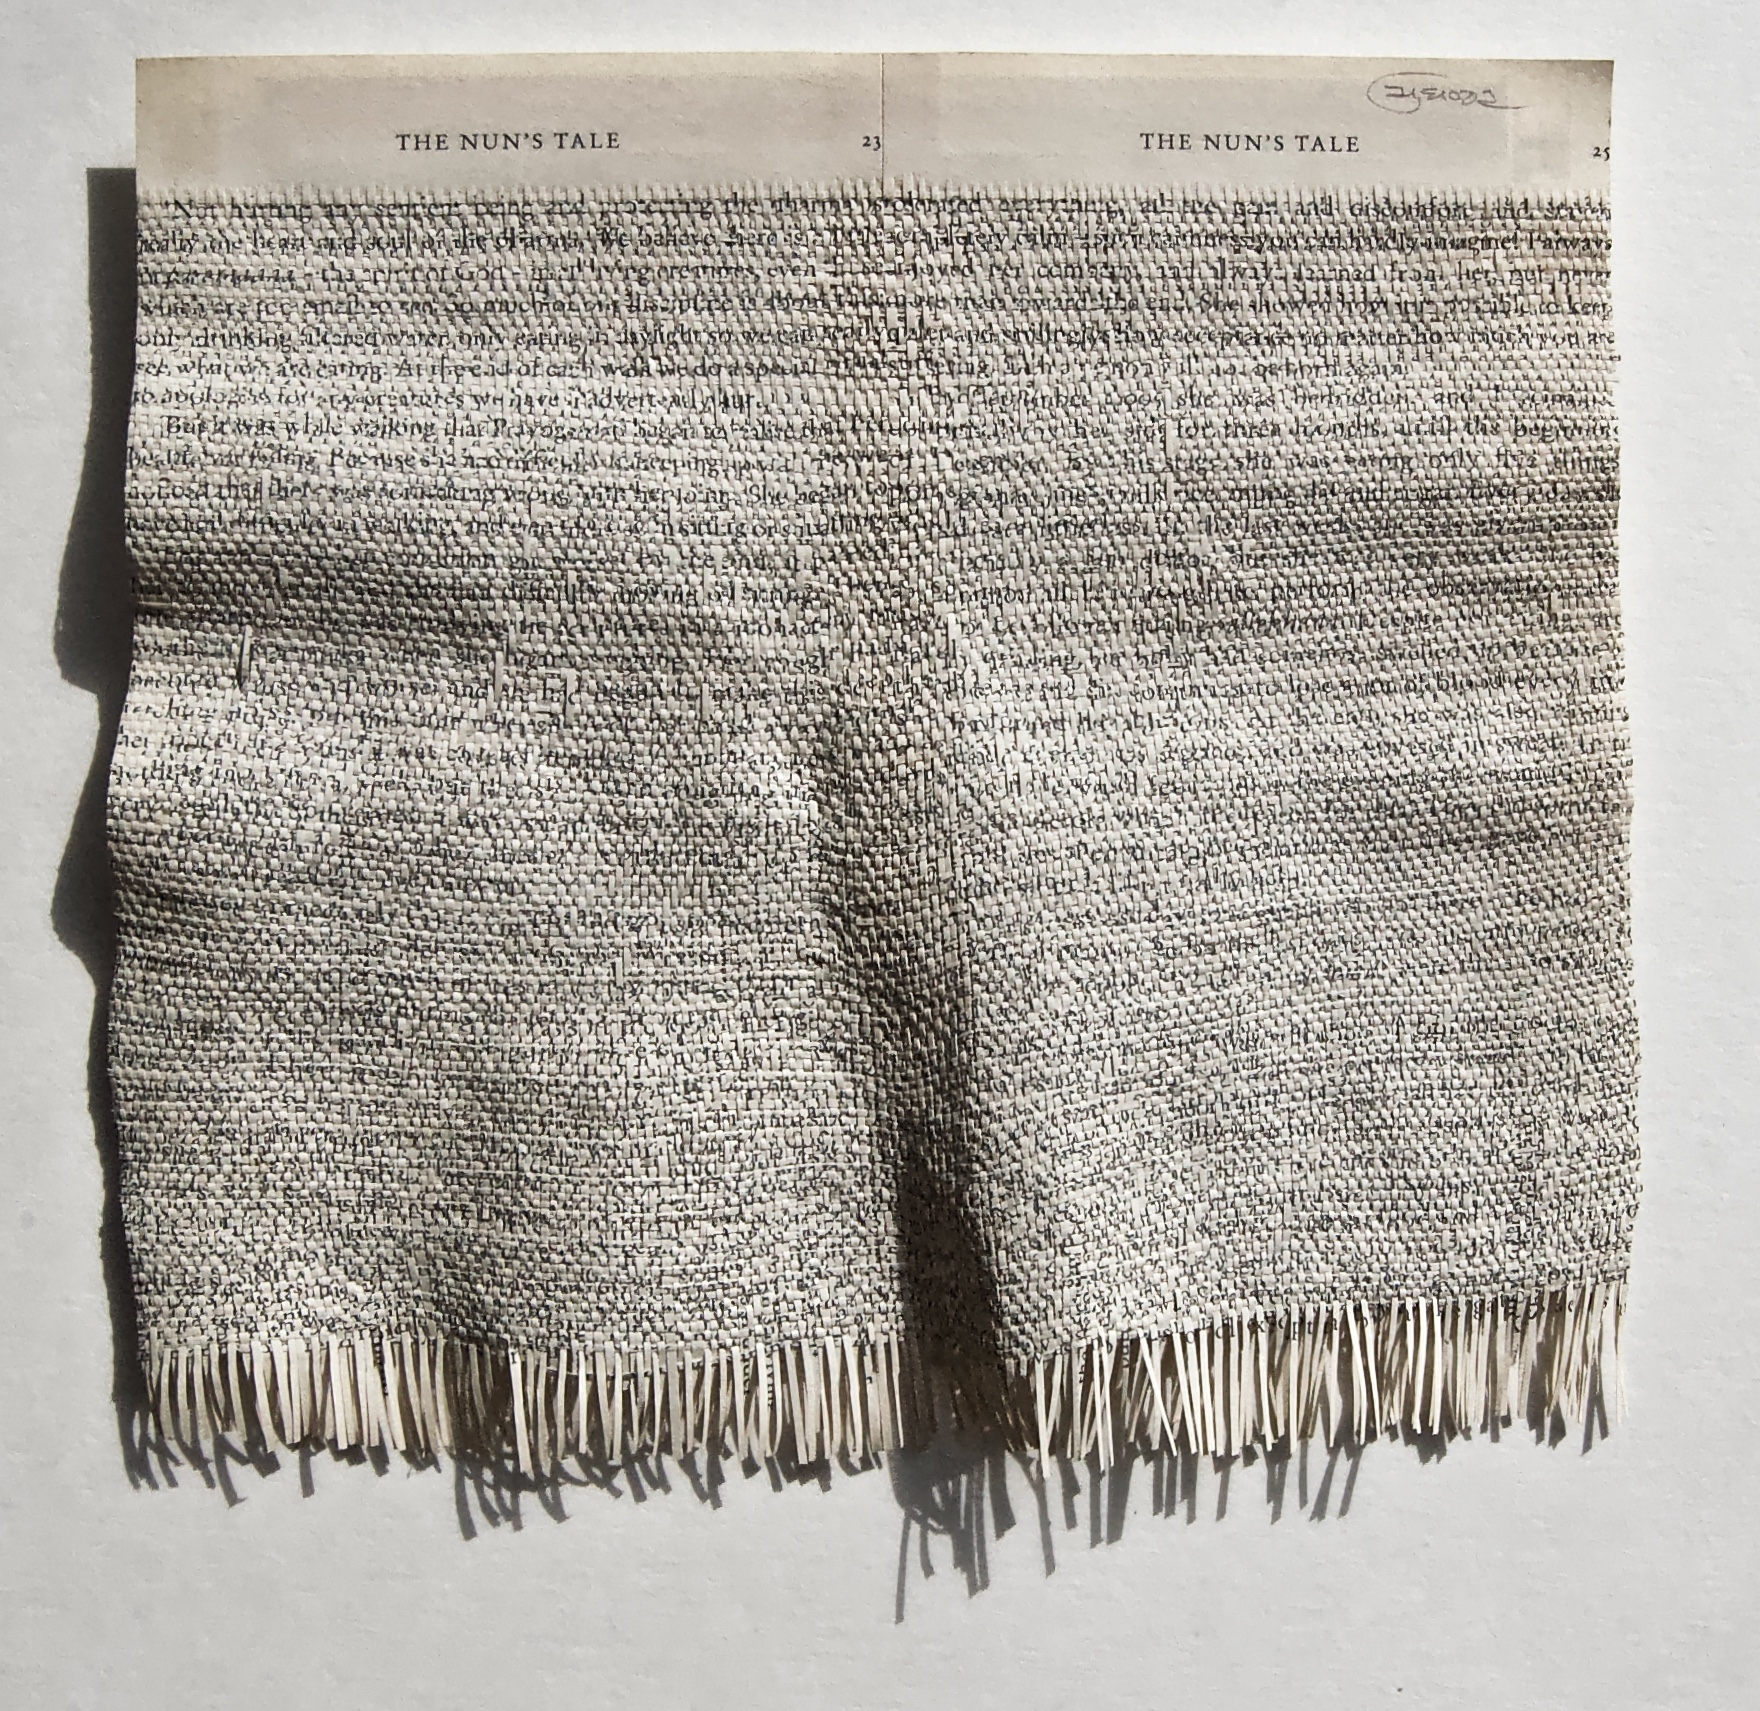 Youdhisthir Maharjan, Hand-woven strips of deacidified pages